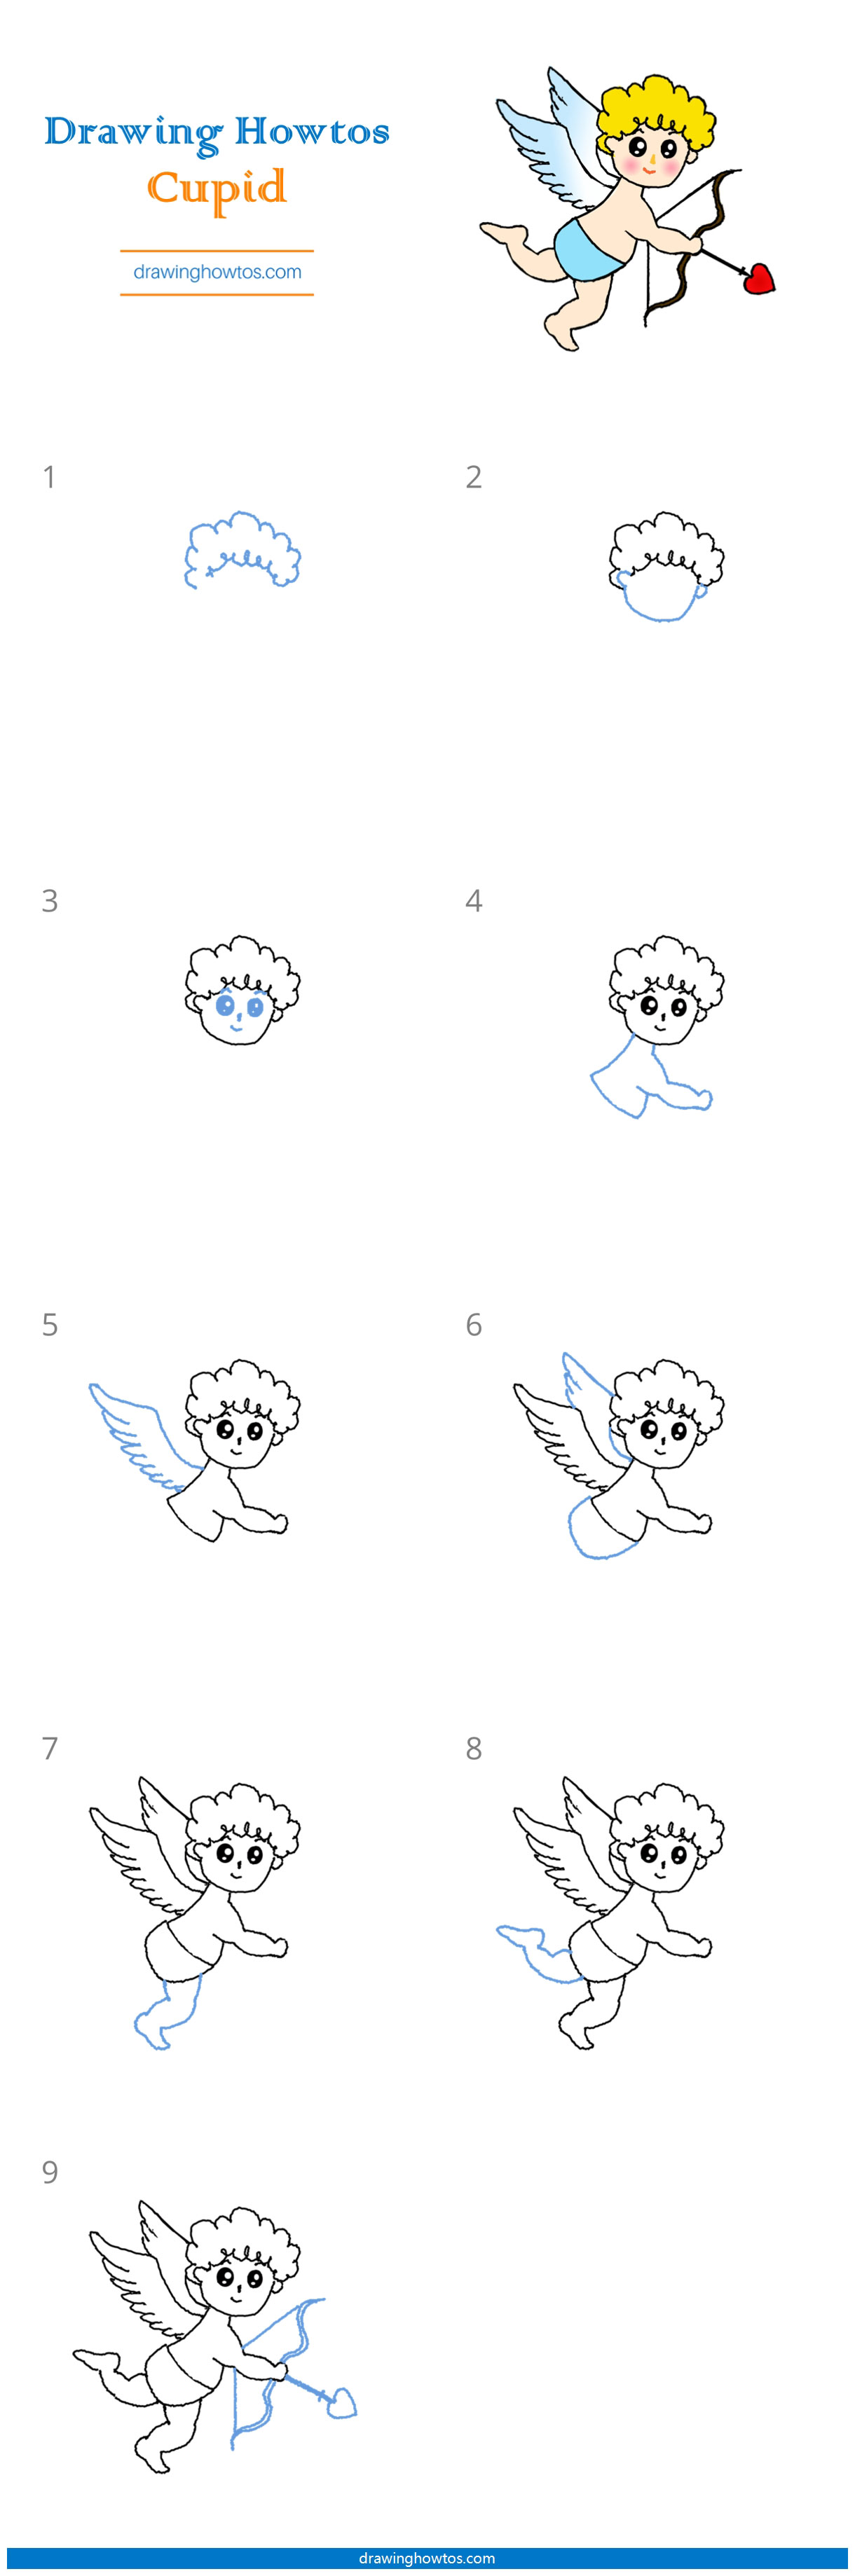 How to Draw Cupid Step by Step Easy Drawing Guides Drawing Howtos